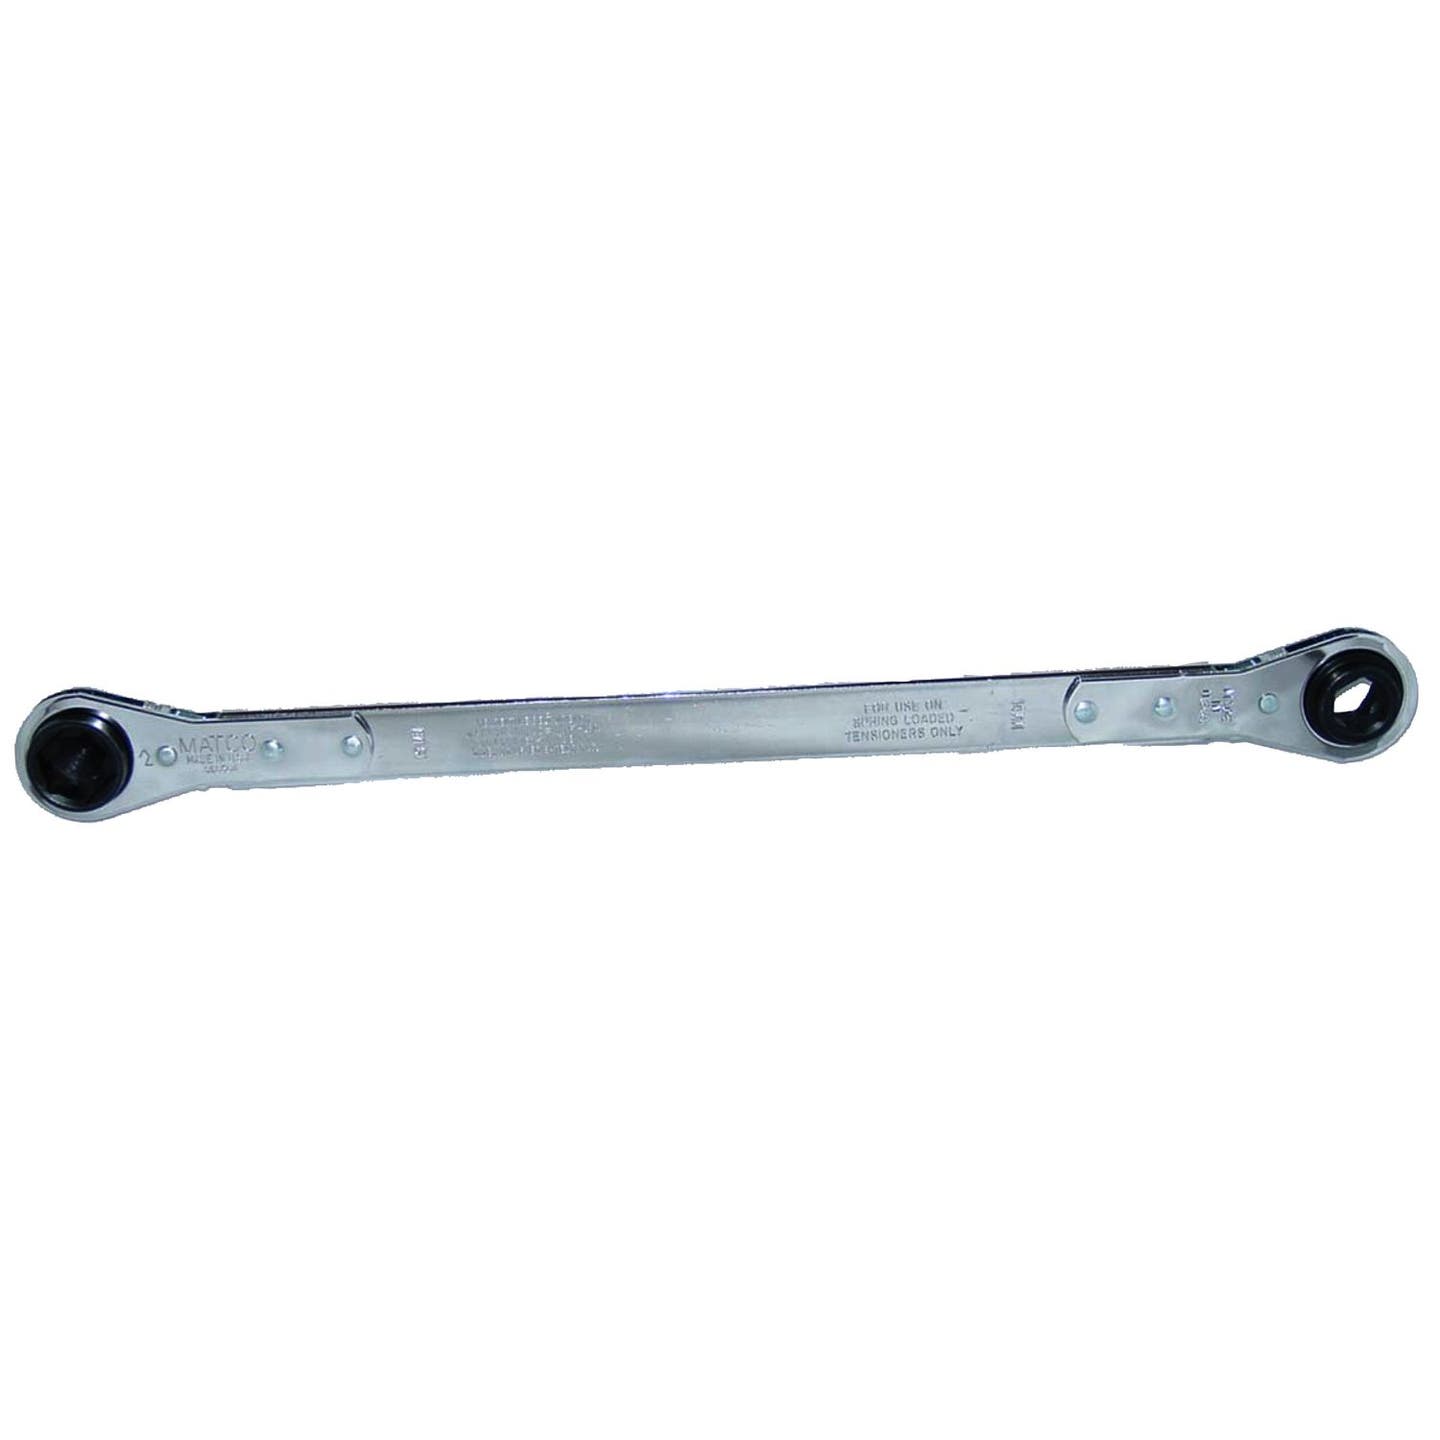 RATCHETING SERPENTINE BELT WRENCH 15-16MM x 3/8" - 1/2" SQUARE DRIVE